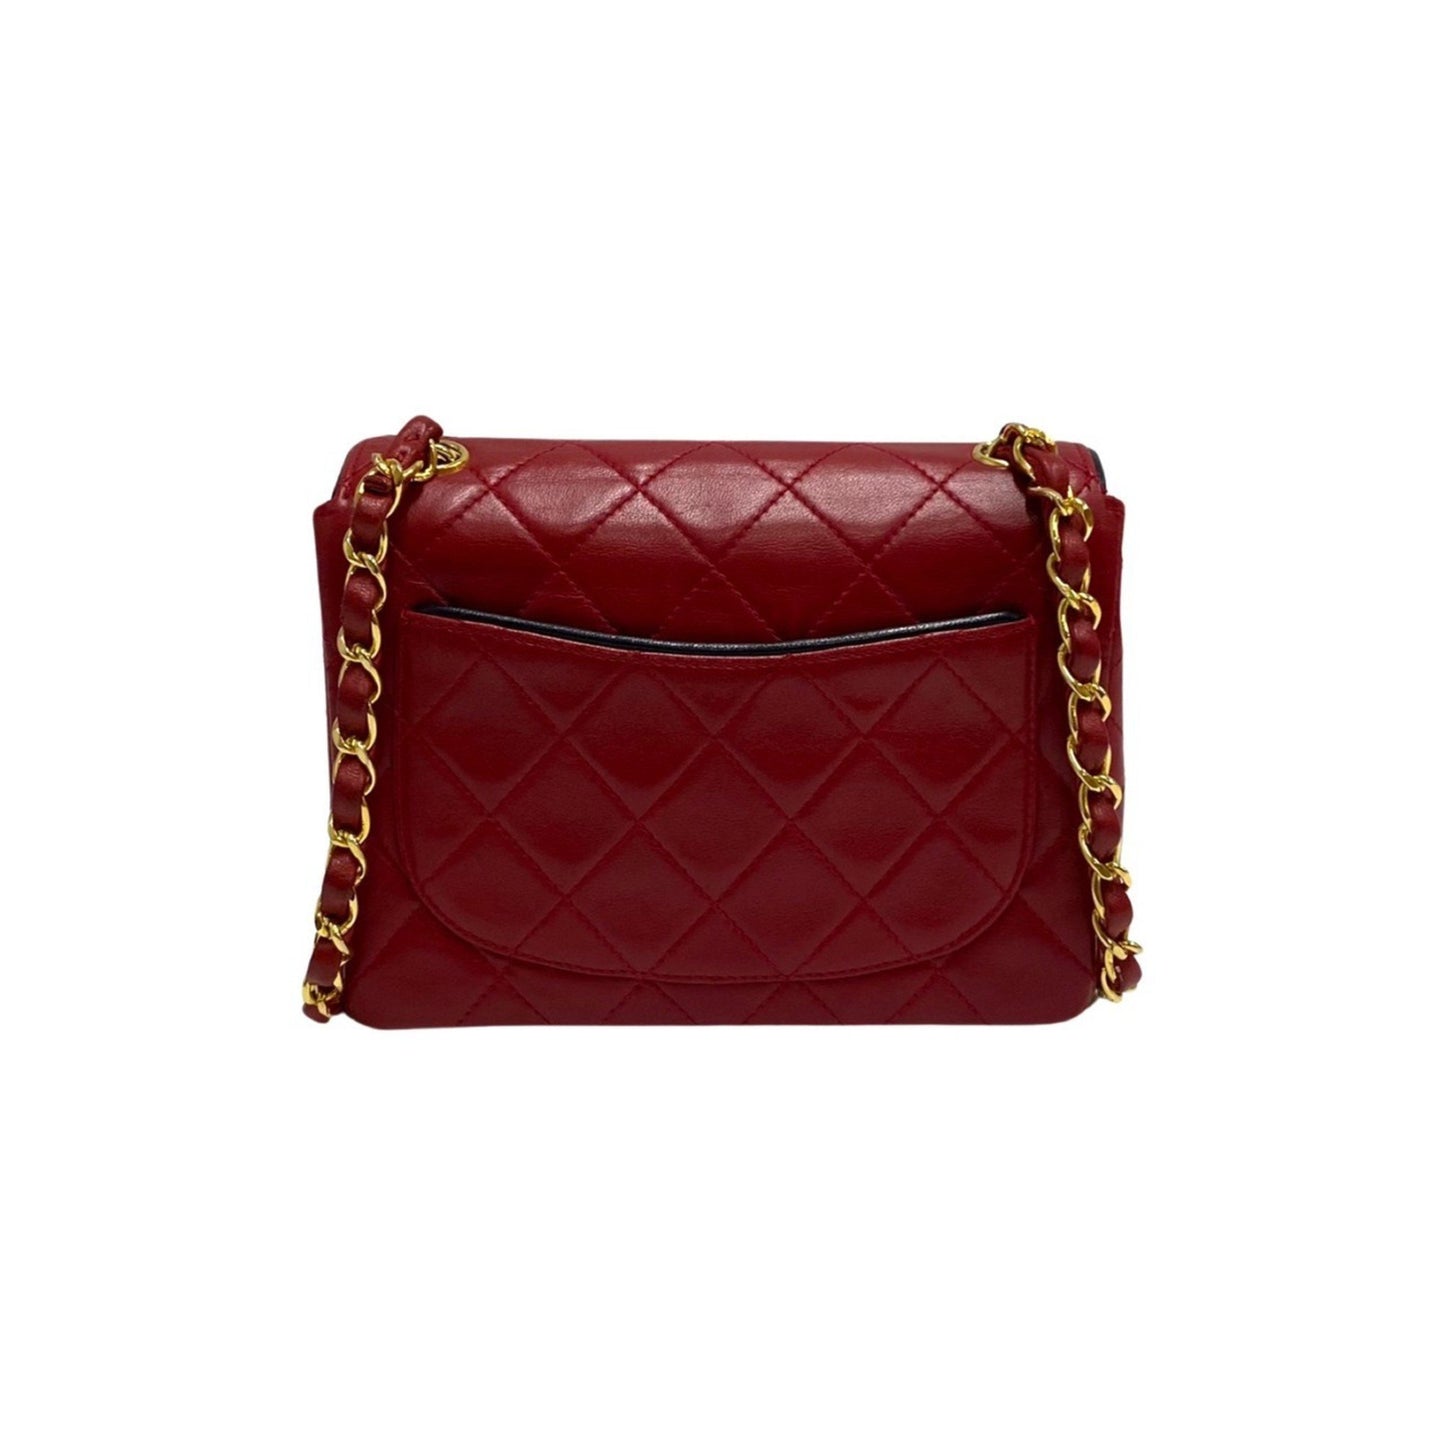 Chanel Women's Red Leather Shoulder Bag in Red